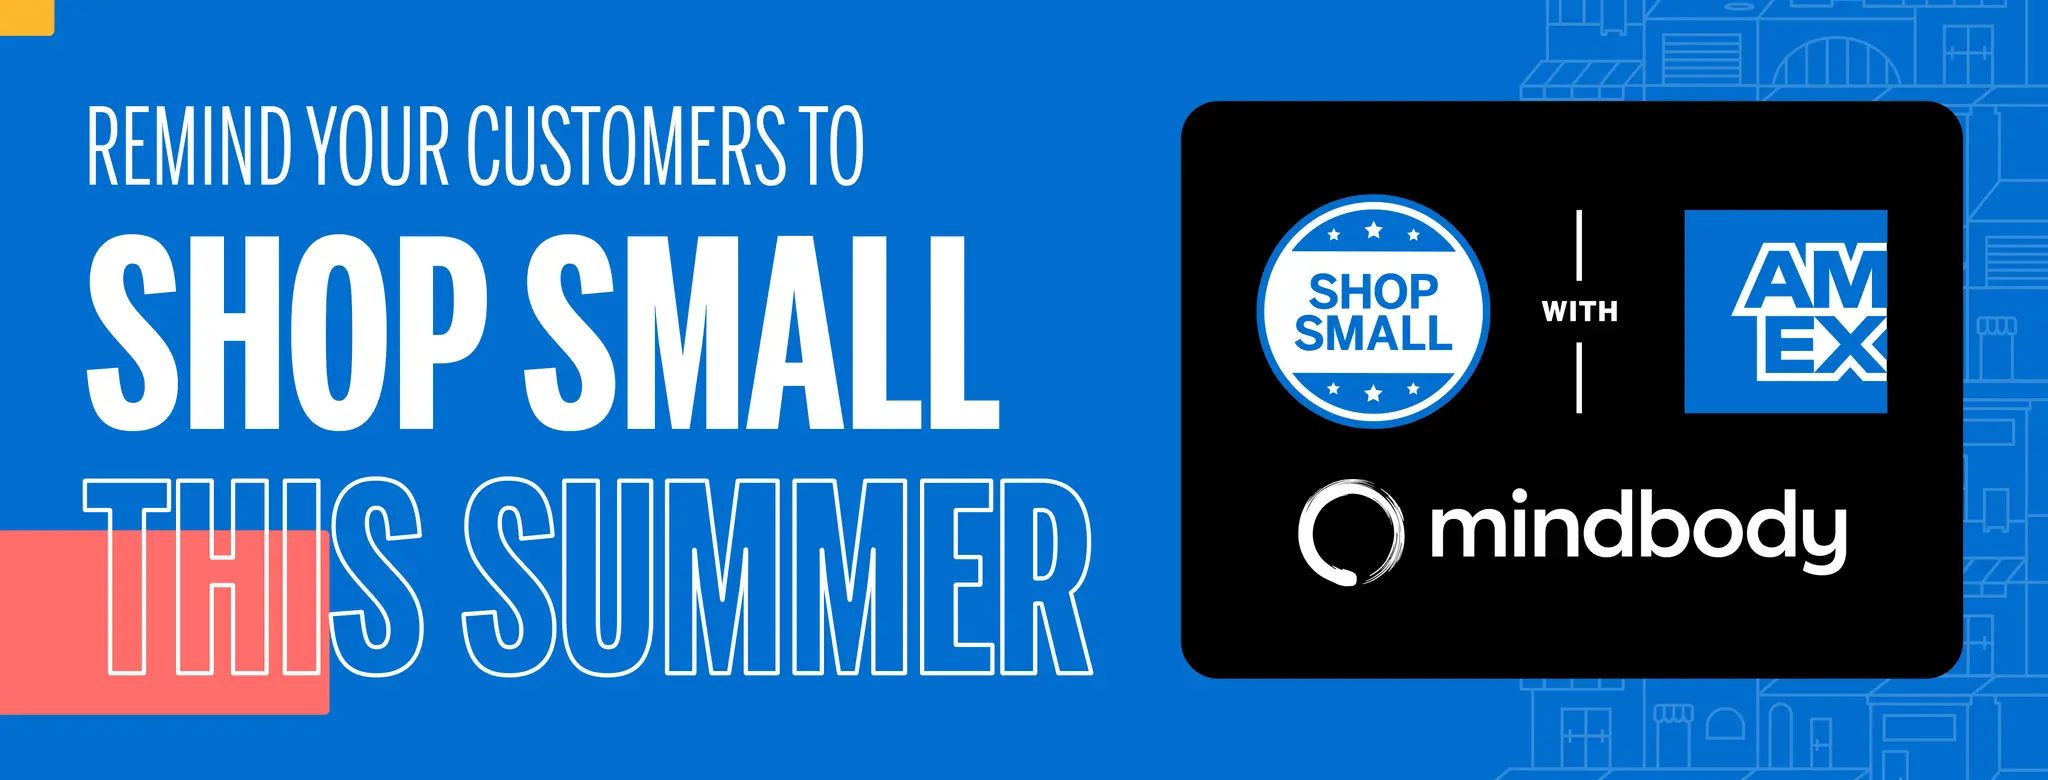 Remind your customers to Shop Small this summer